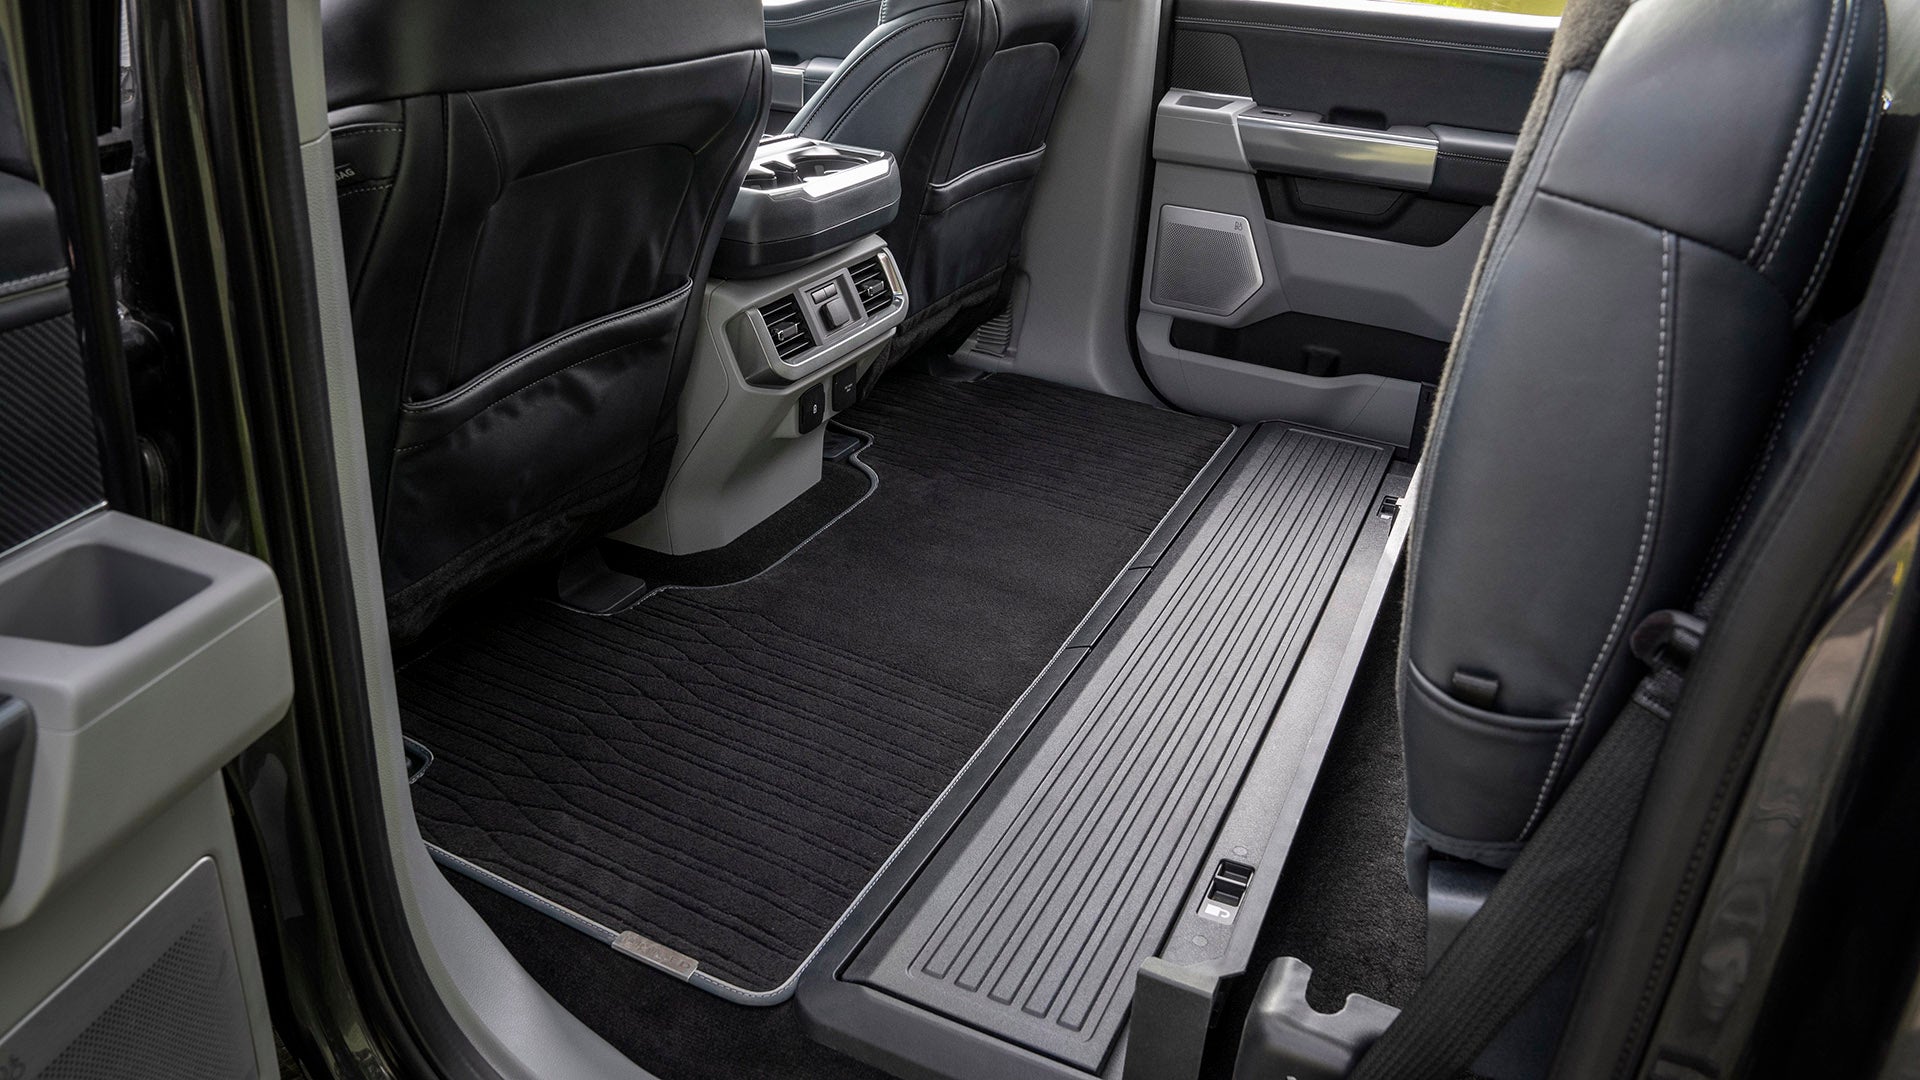 Flat load floor behind the front seats., <i>Ford</i>